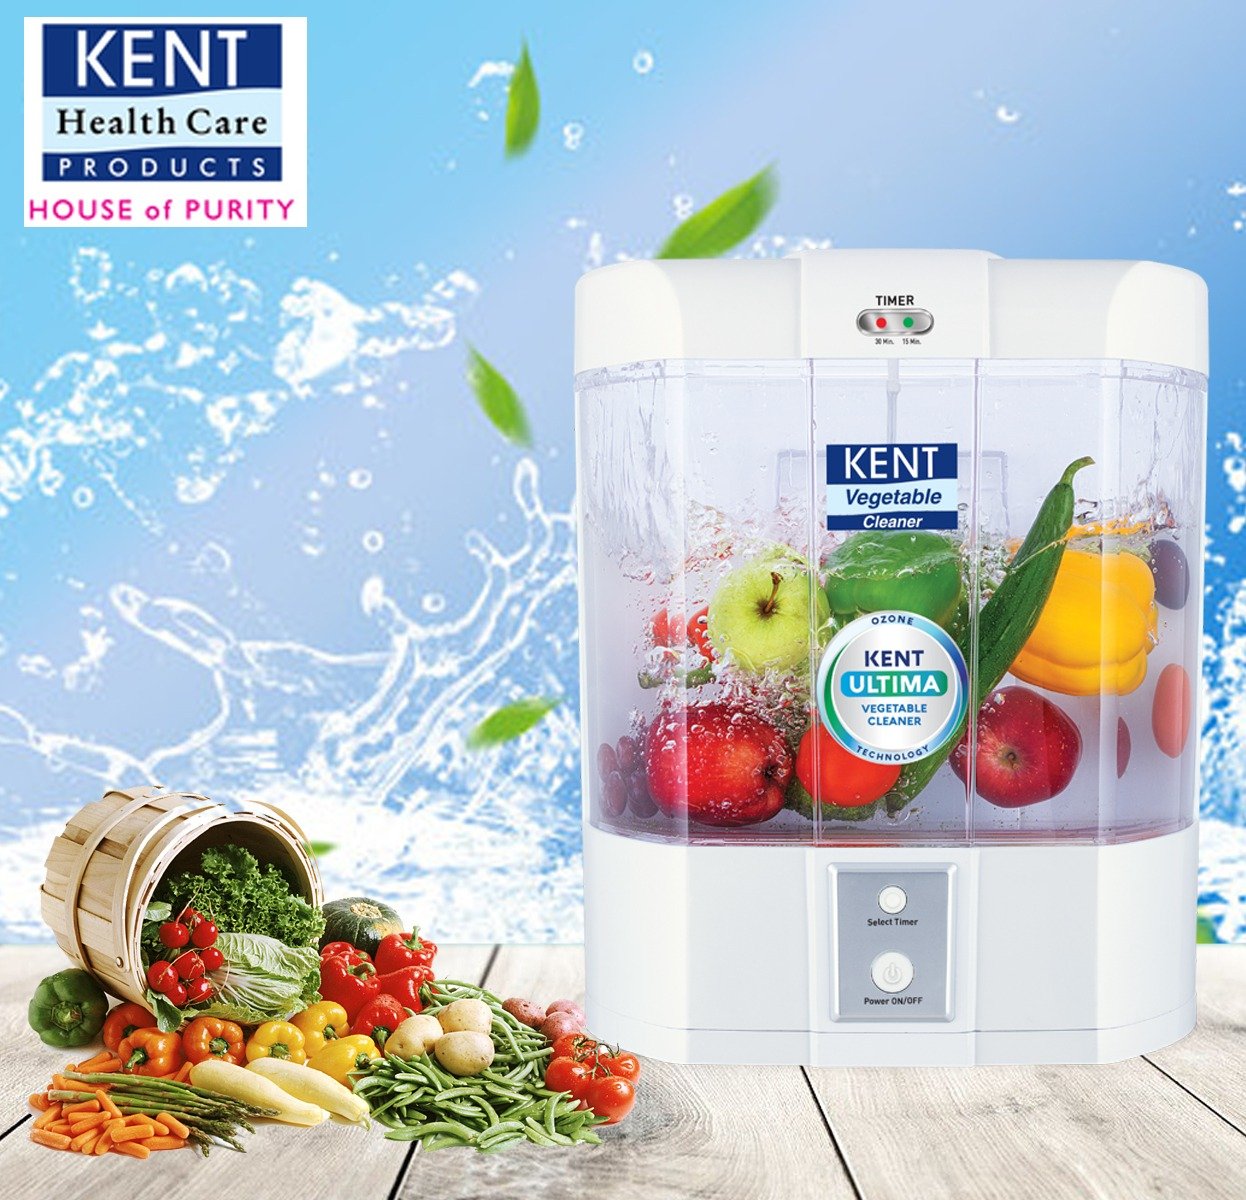 Kent Launches Ultima Vegetable Cleaner to ensure safe & Hygienic Consumption of Fruit, meat & vegetables